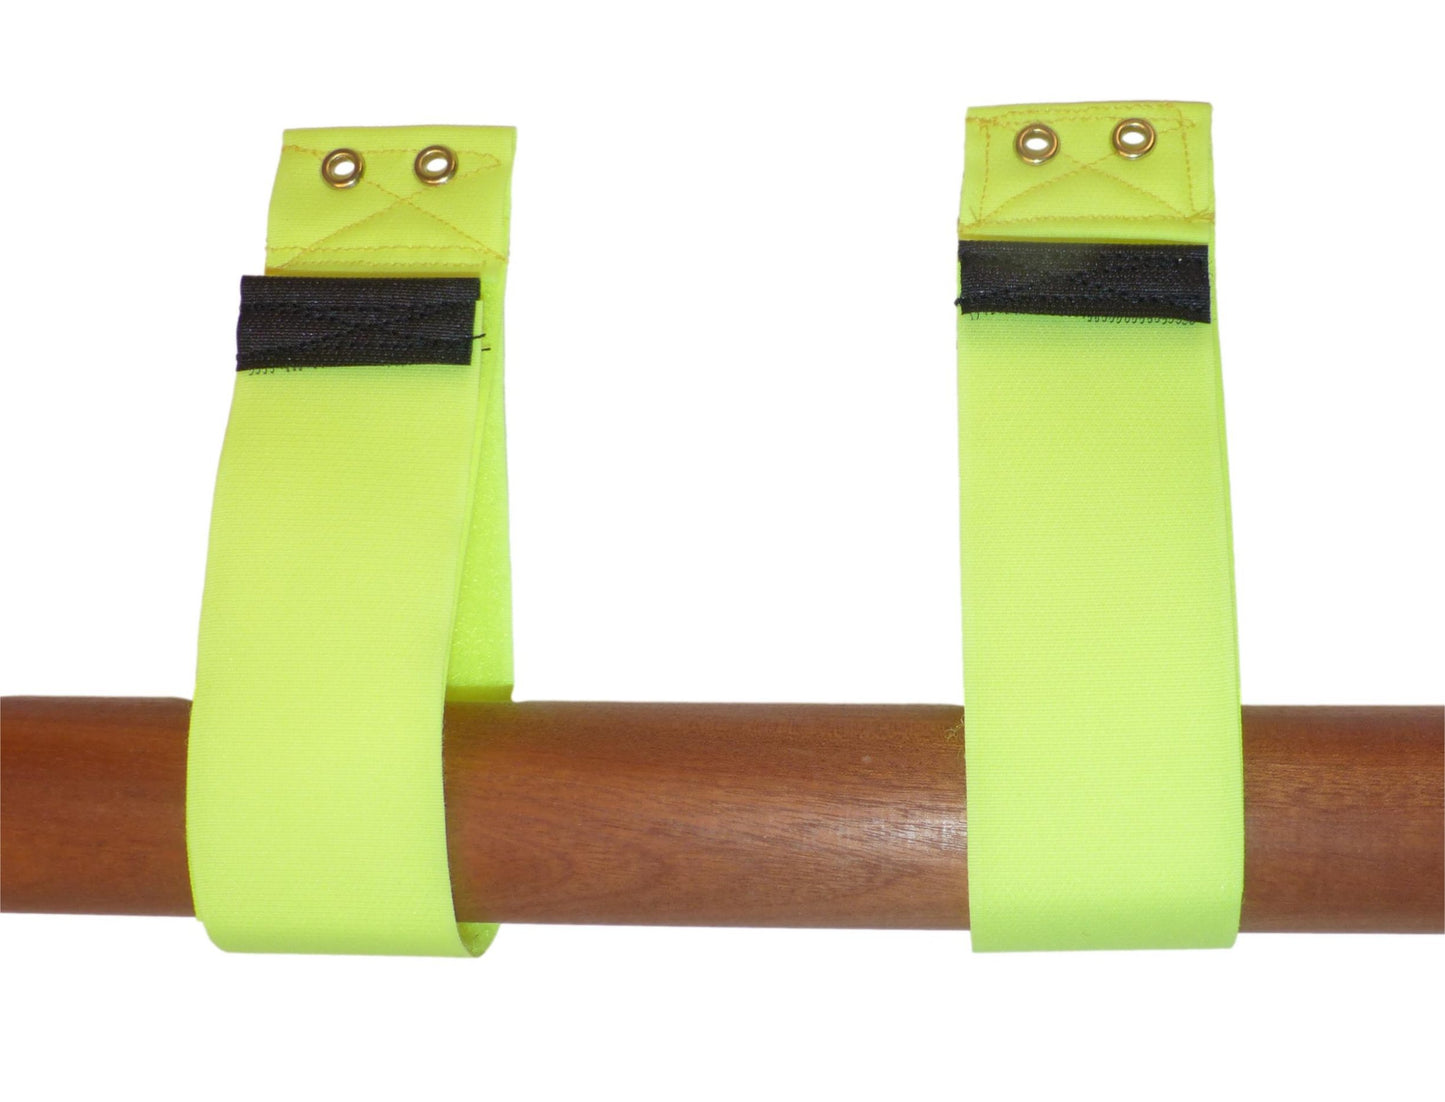 Premium 50mm Hook & Loop Tidy & Hang Strap with Eyelet (Pack of Two) in yellow